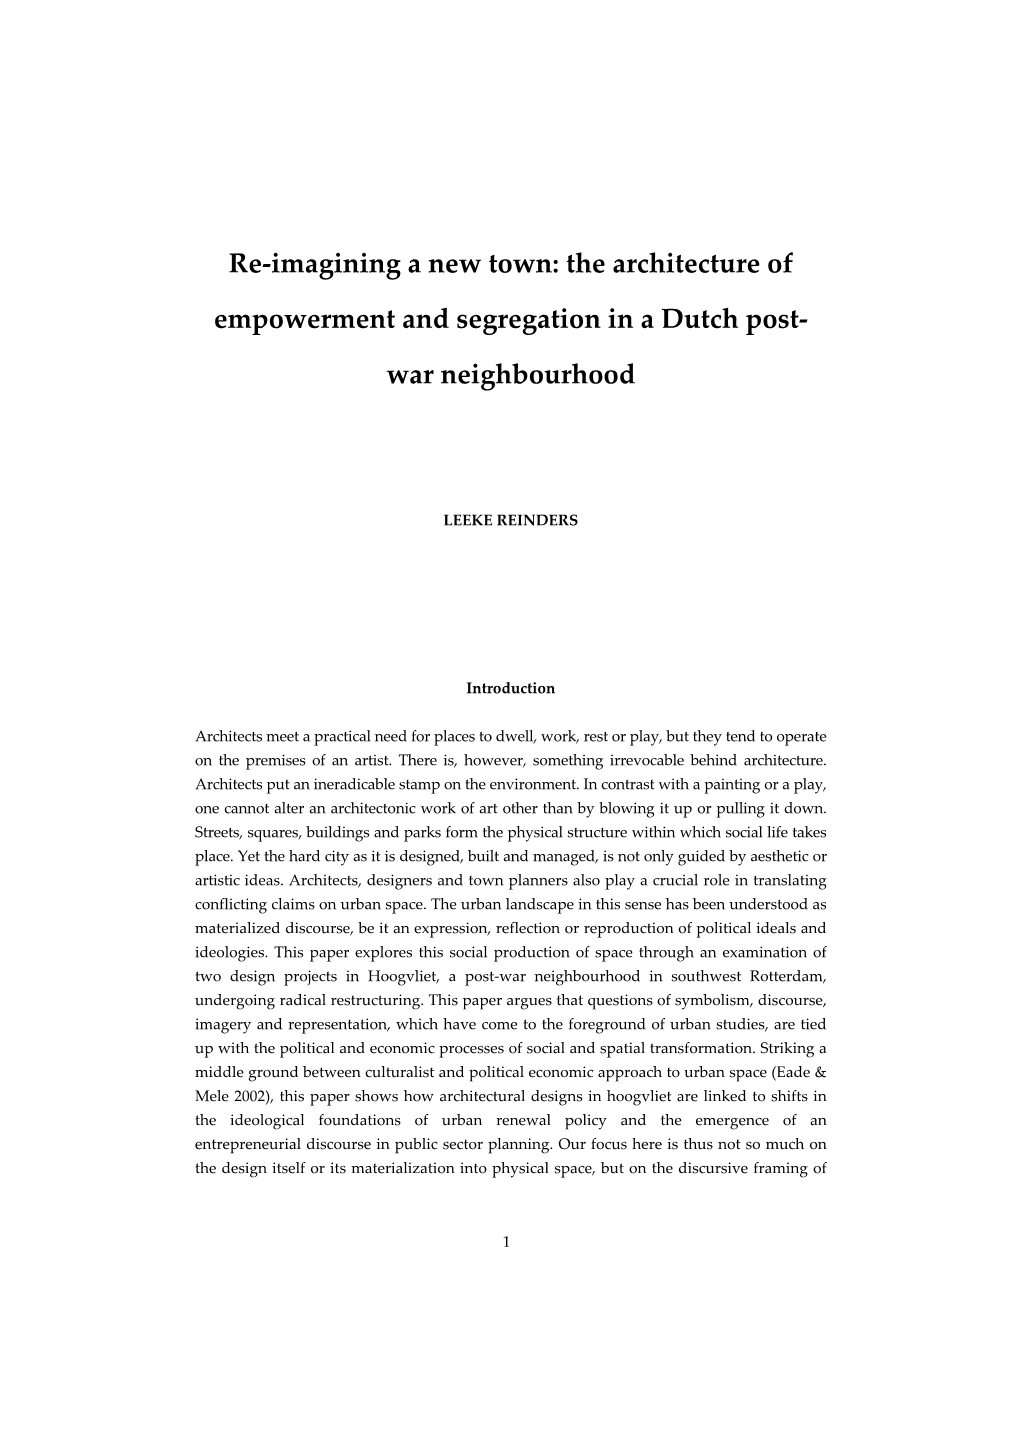 Discourses of Identity and Representation in the Regeneration